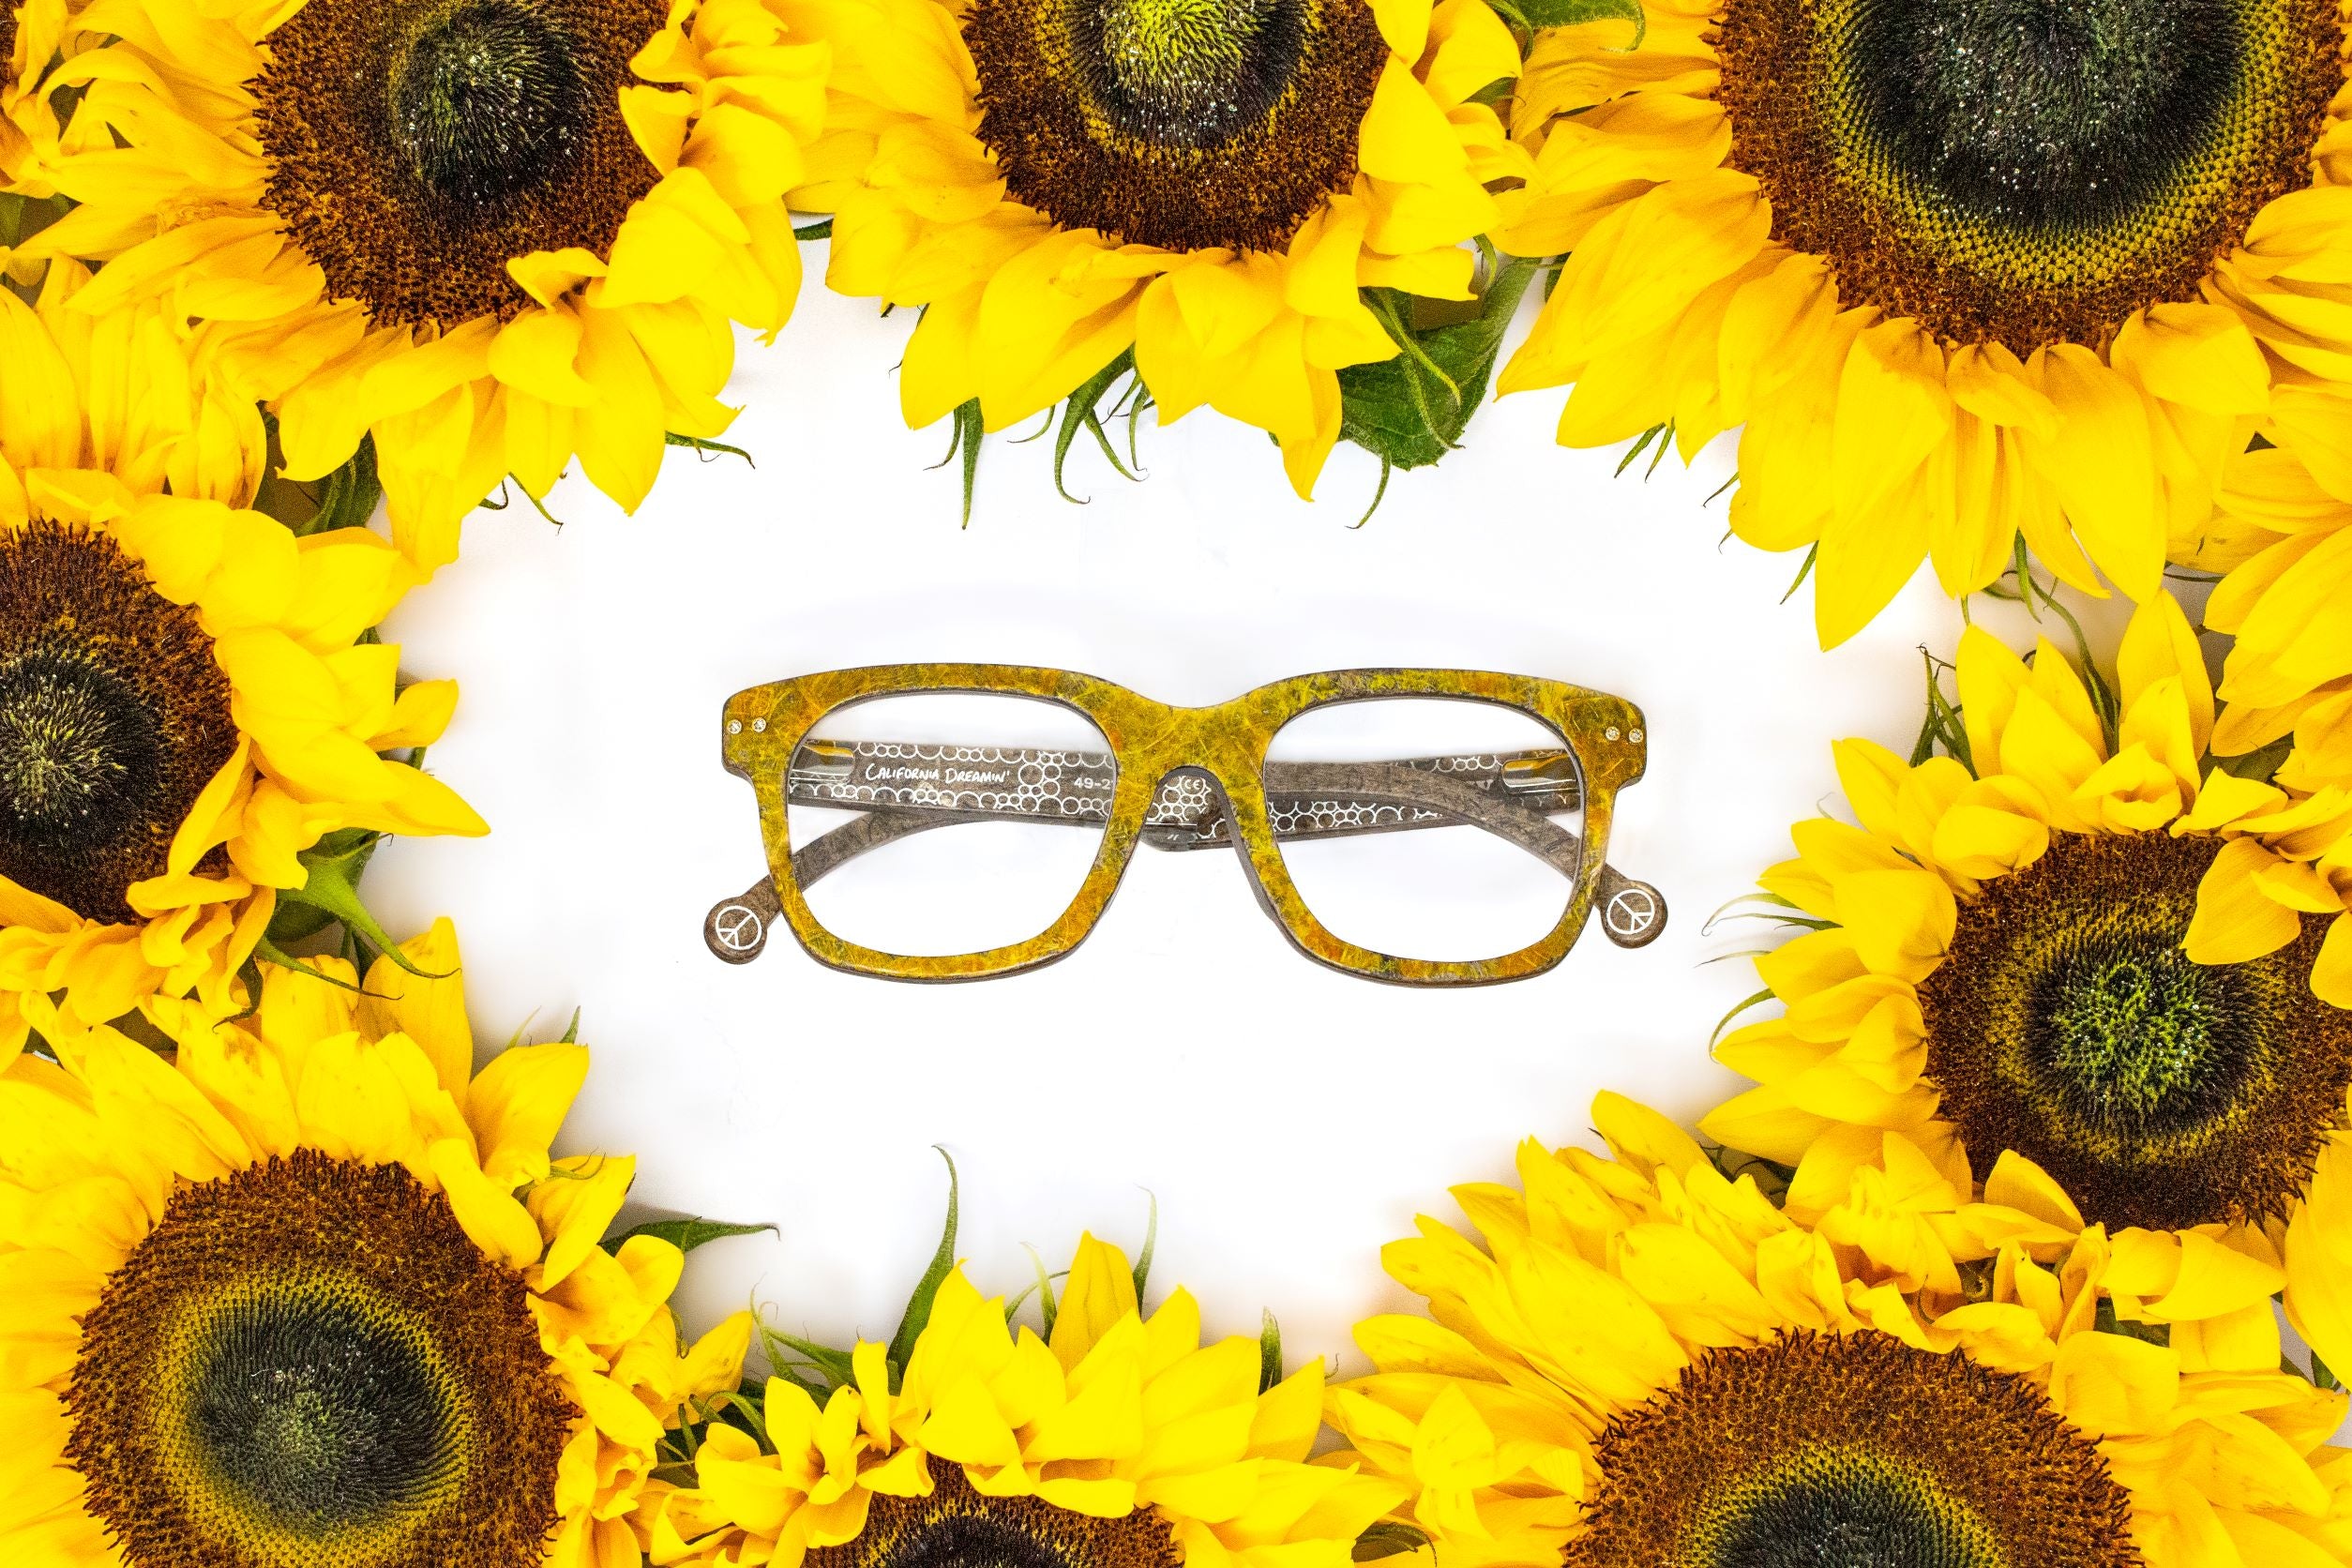 Introducing the Mellow Collection: They call me Mellow Yellow...